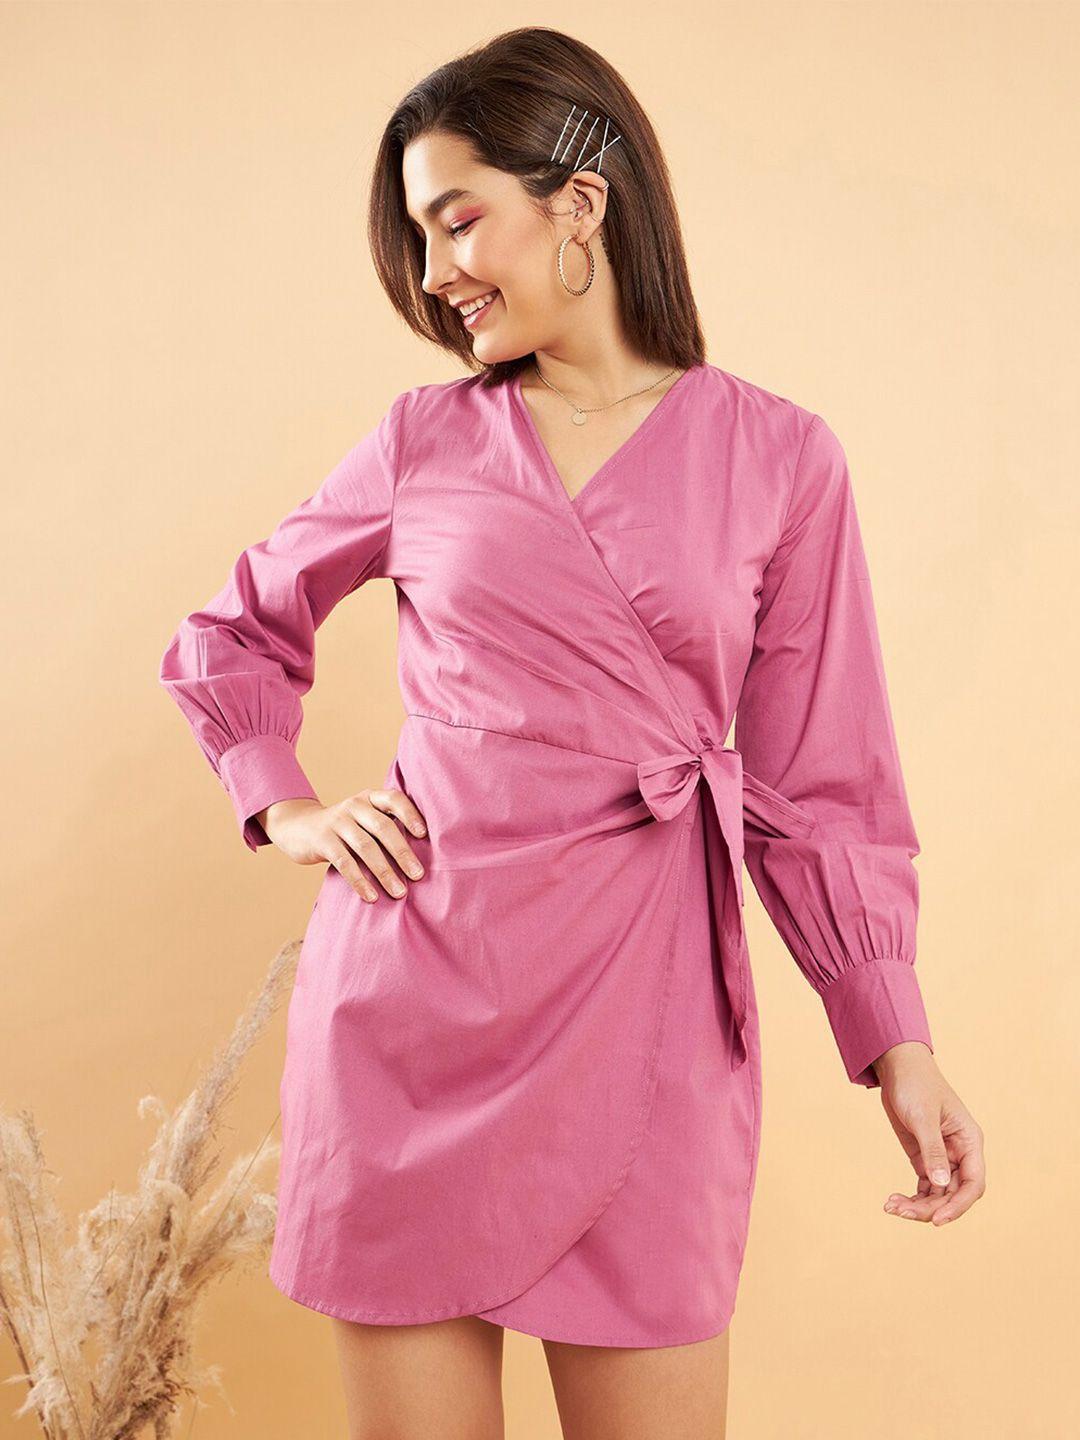 kassually pink v-neck cuffed sleeves tie ups pure cotton wrap dress